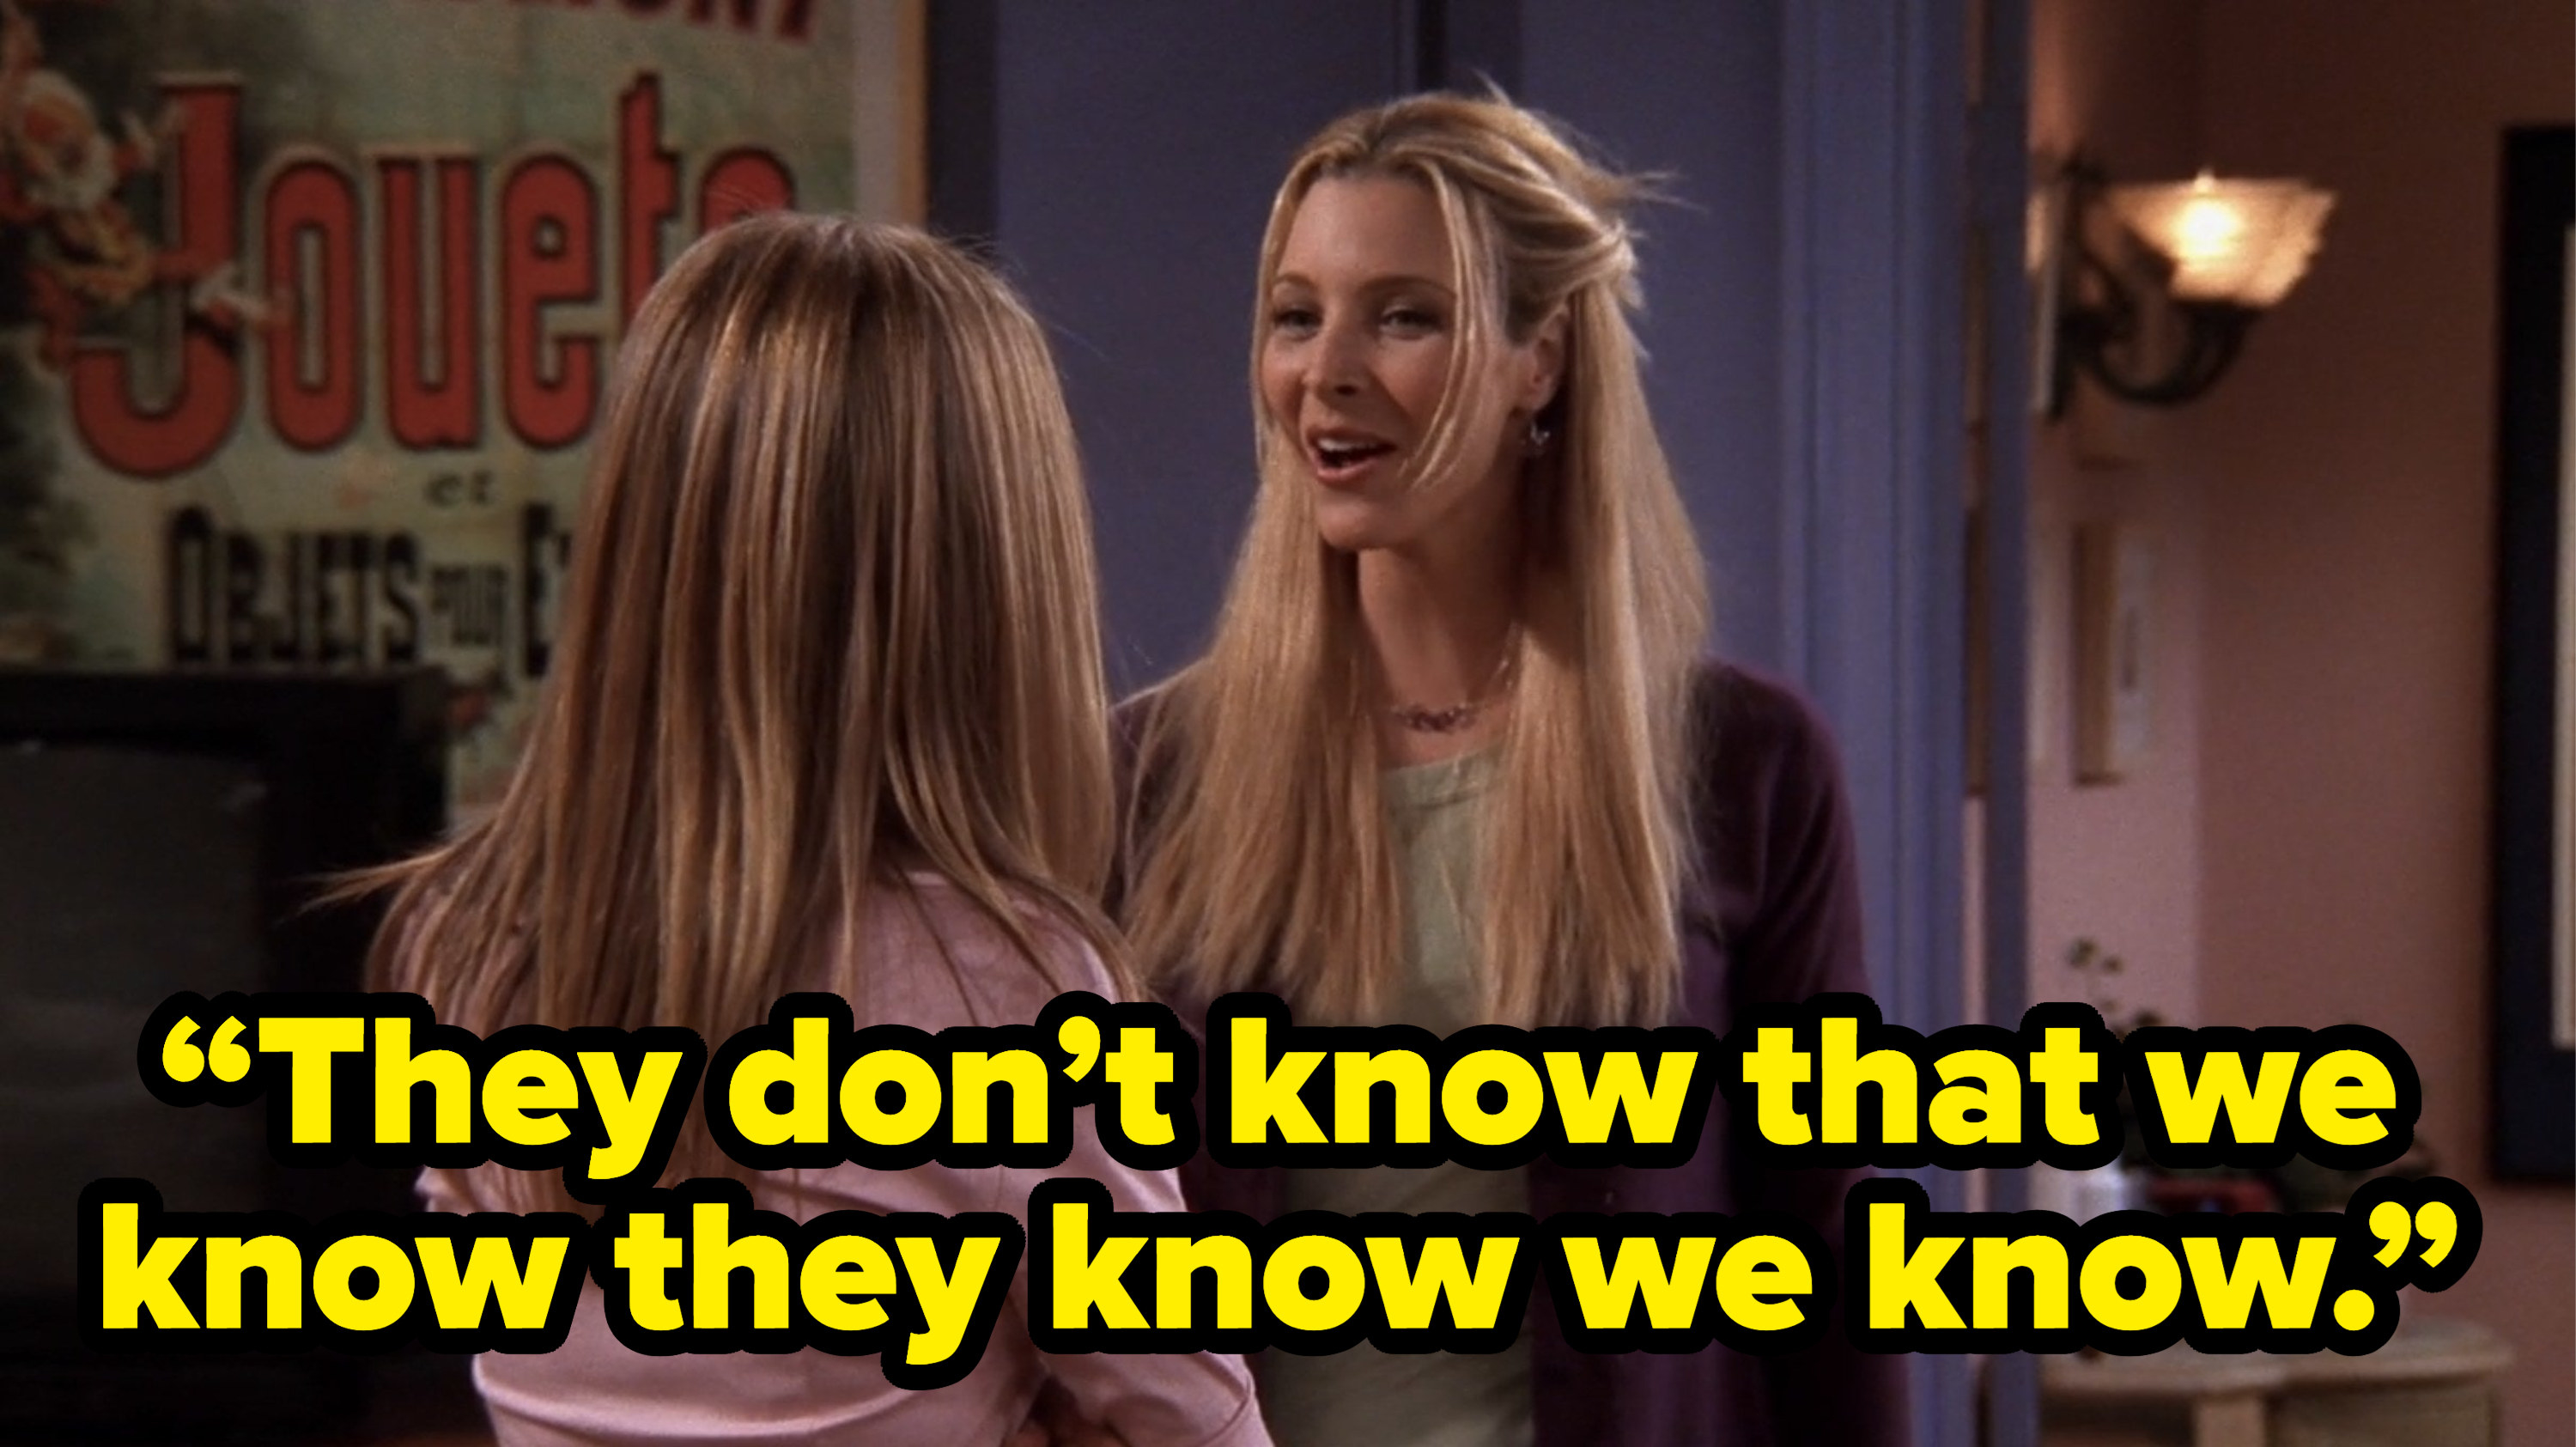 phoebe saying “They don’t know that we know they know we know.” on friends